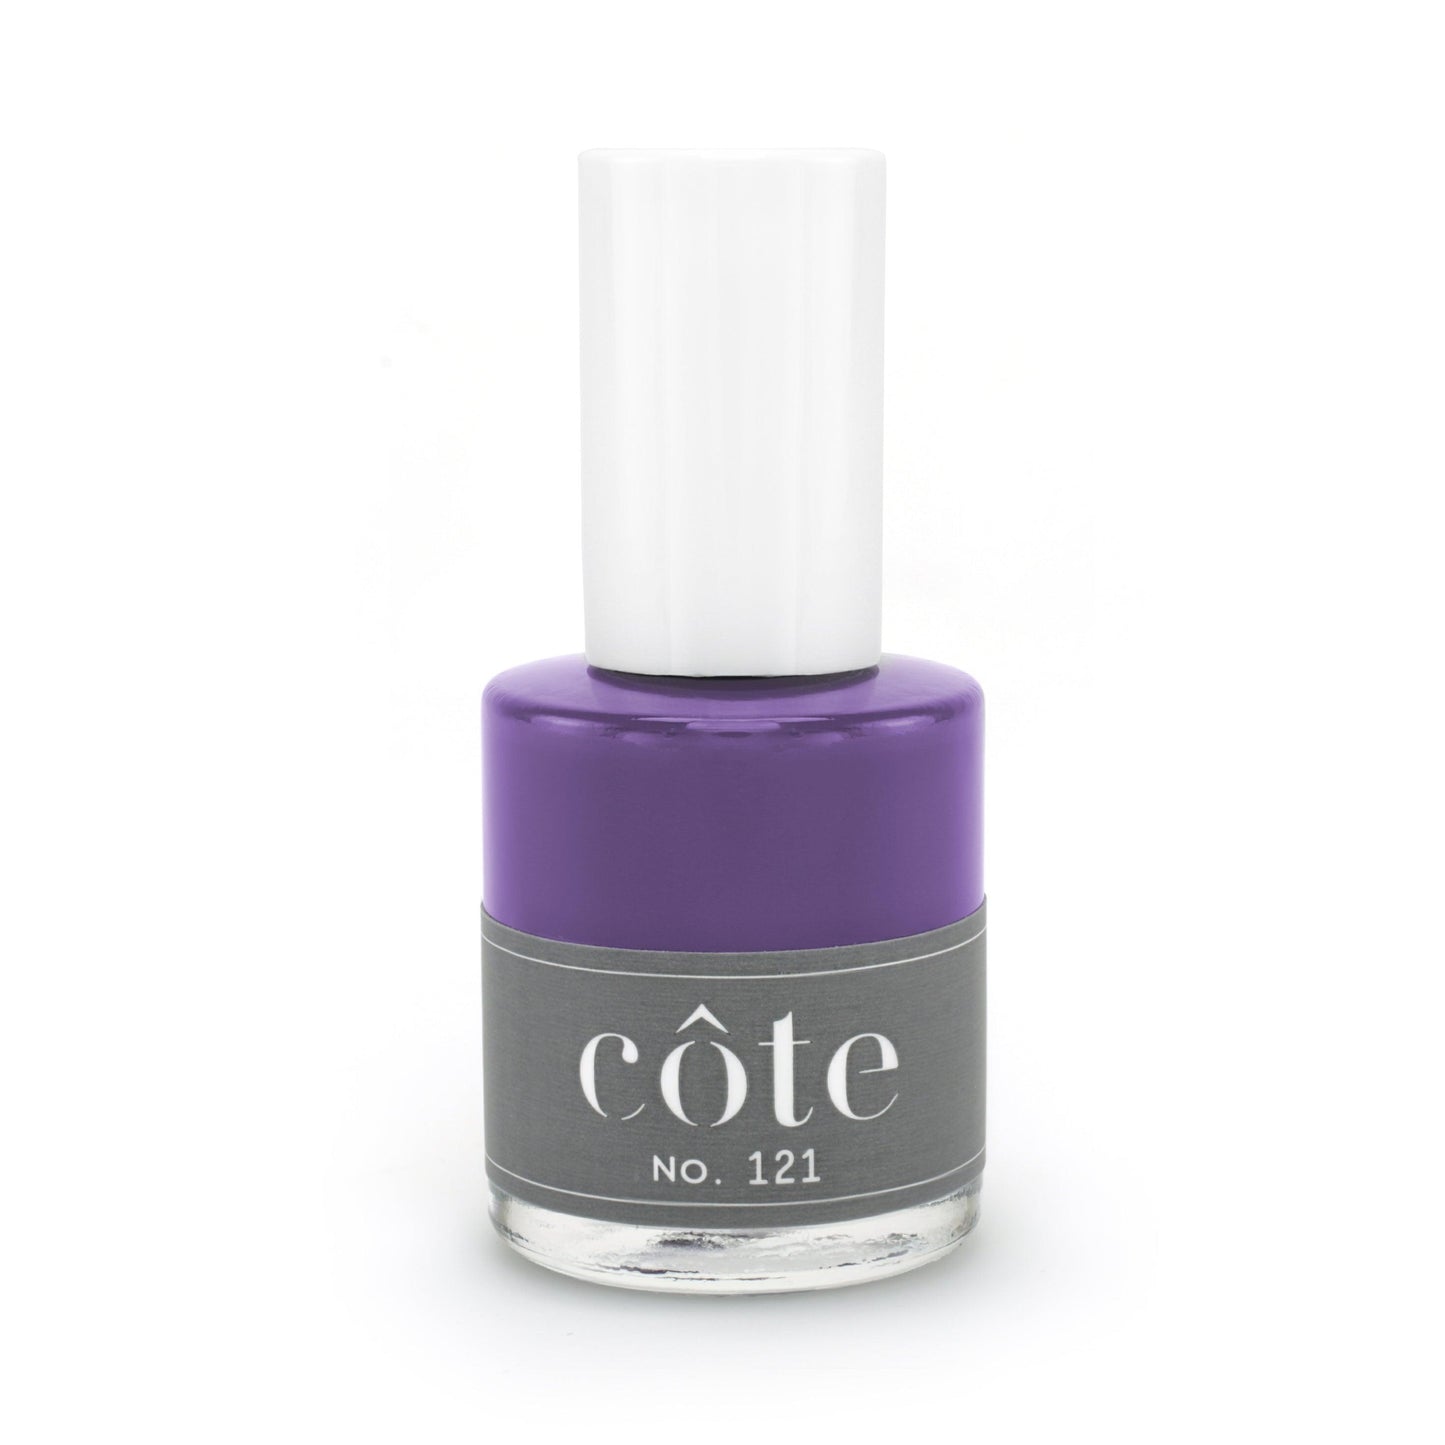 Colored Nail Polish (6 colors) - Photography and Web Design - Los Angeles, US based Shopify Experts Revo Designs